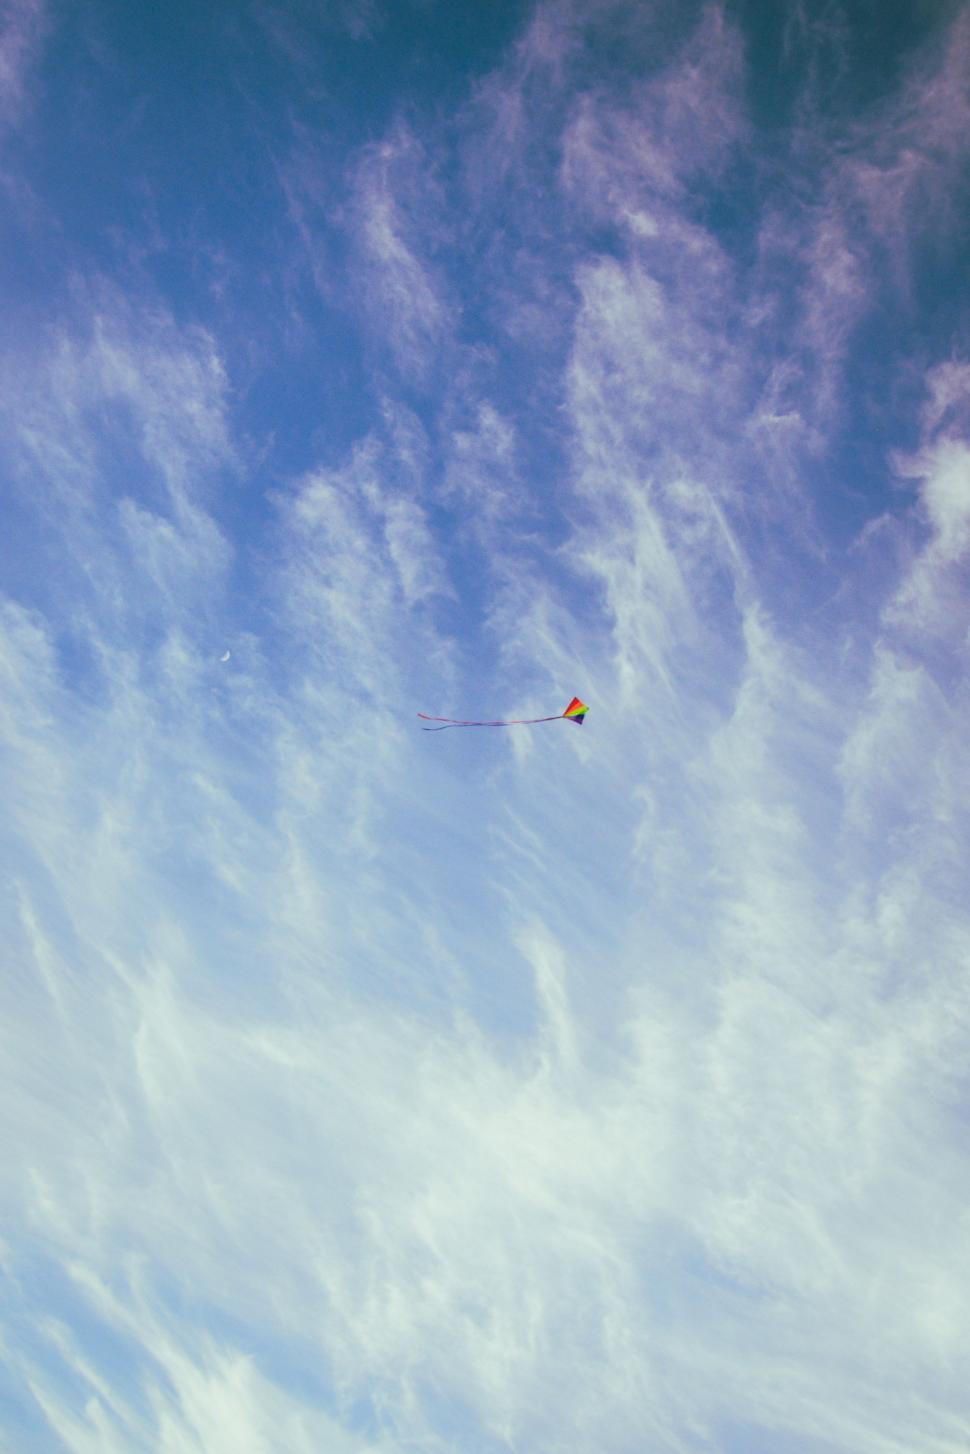 Free Image of parachute rescue equipment equipment sky atmosphere clouds air weather high cloud day fluffy cloudscape climate 